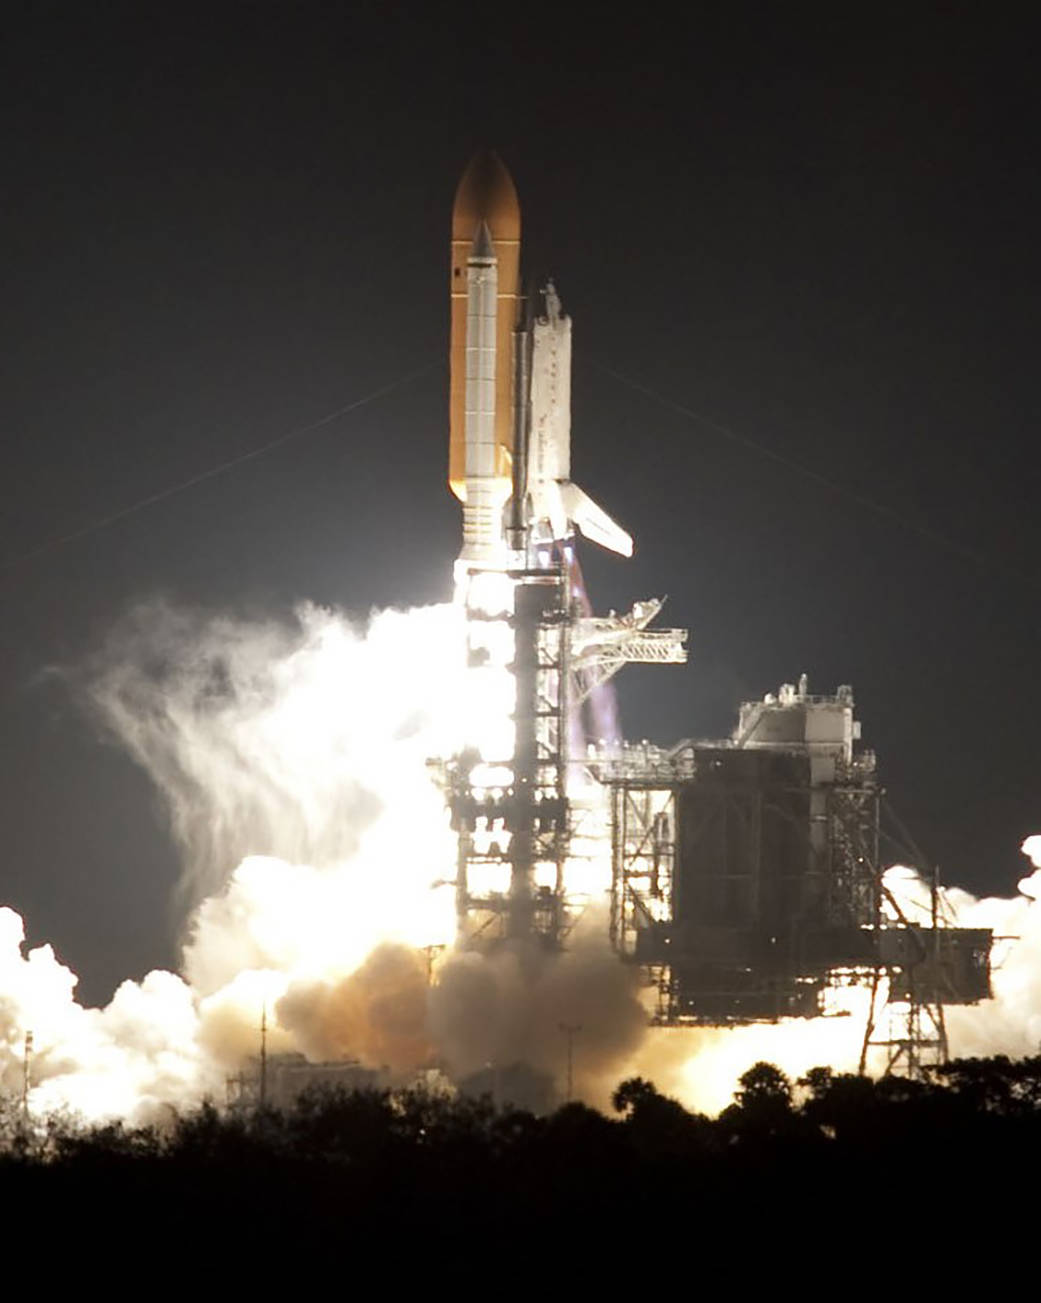 This week in 2010, space shuttle Discovery, mission STS-131, launched from NASA’s Kennedy Space Center.